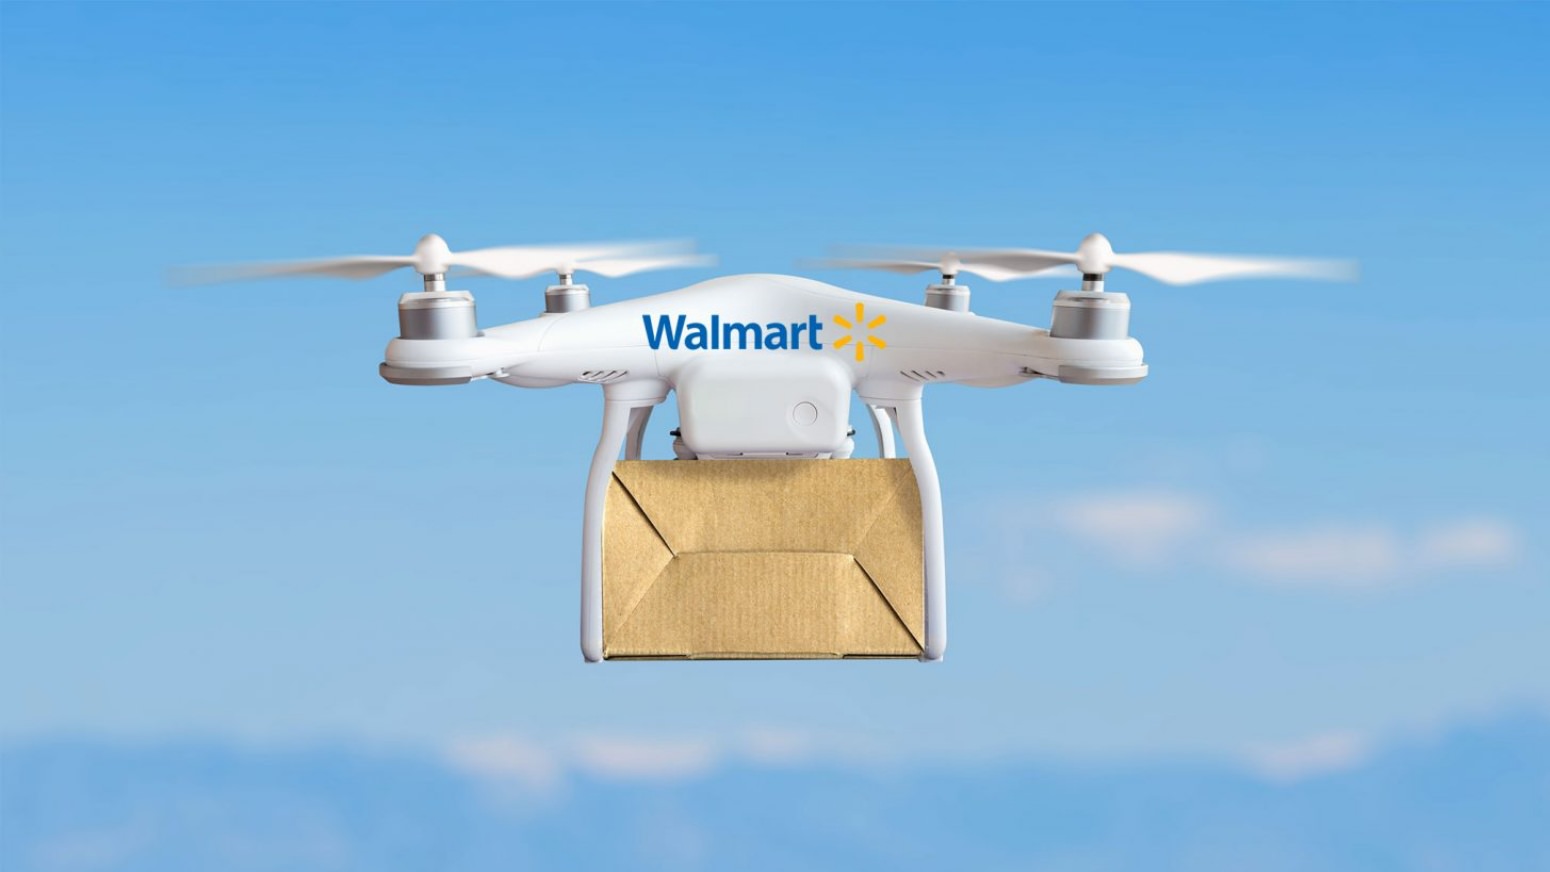 DJI-files-more-drone-patents-than-Walmart-and-Amazon-combined-f.jpg